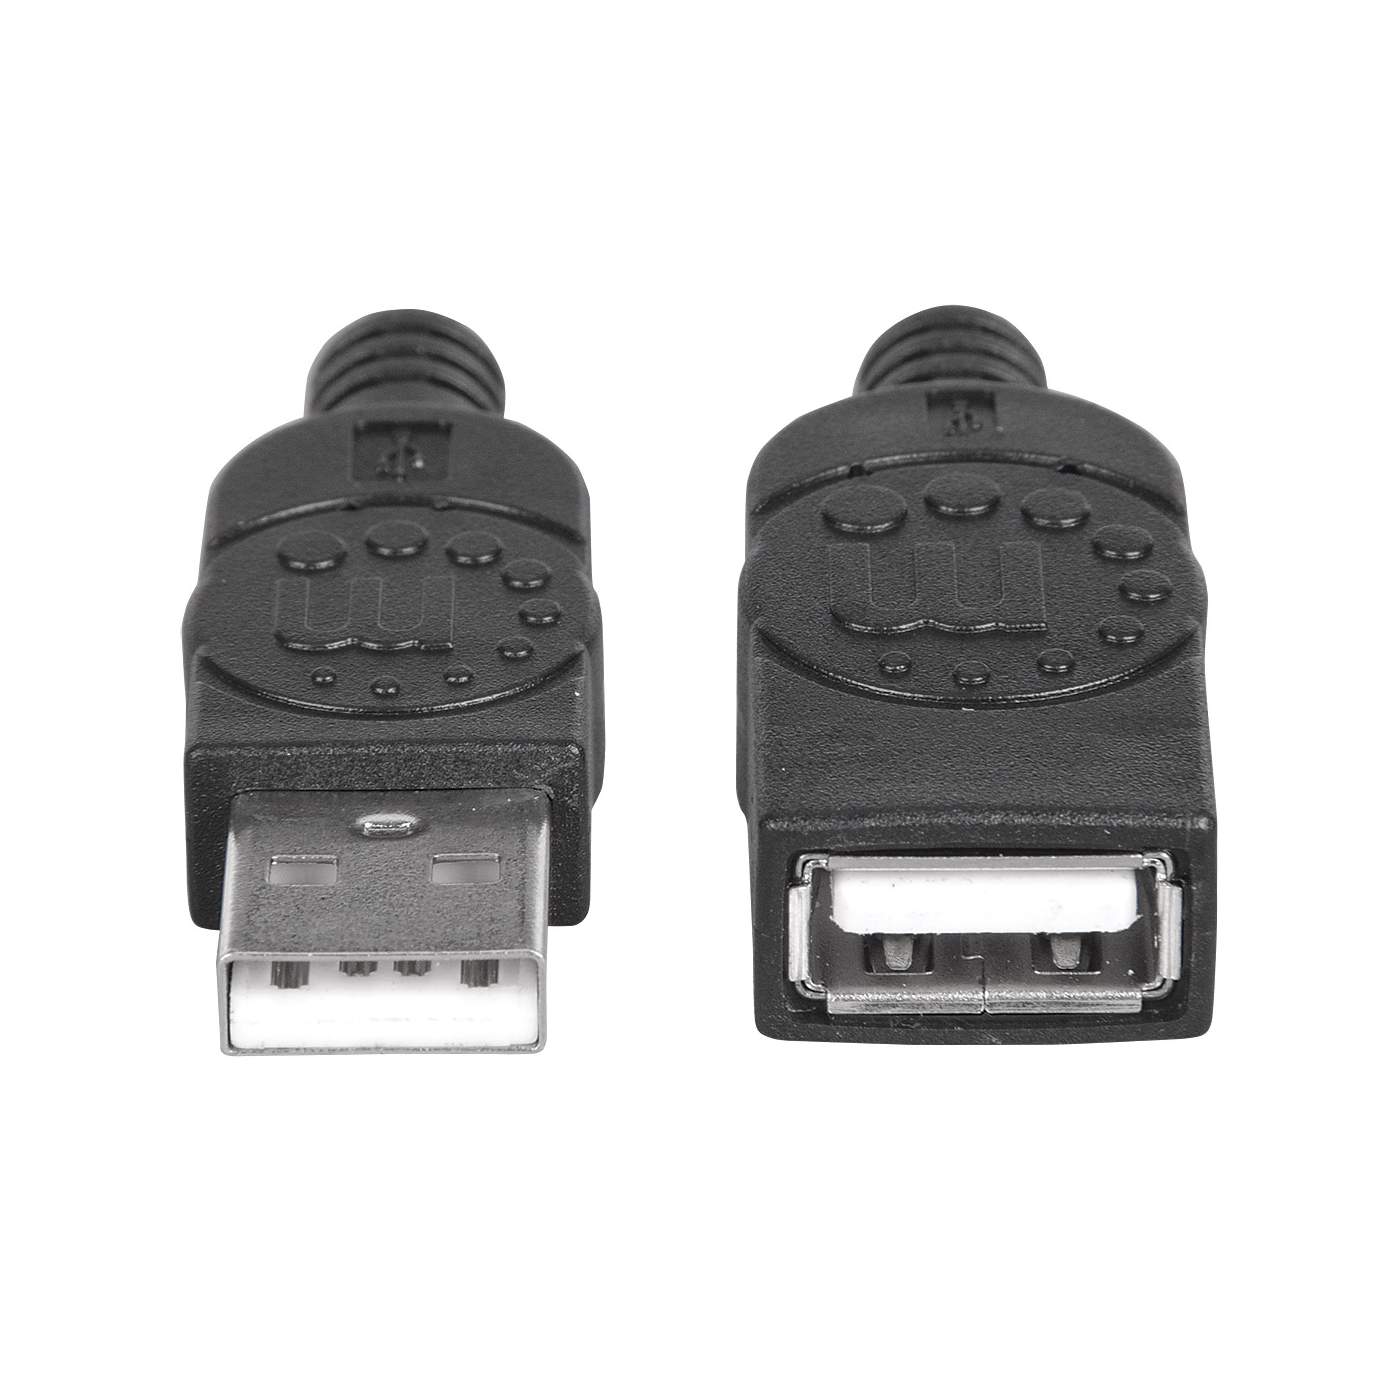 Hi-Speed USB Extension Cable Image 3